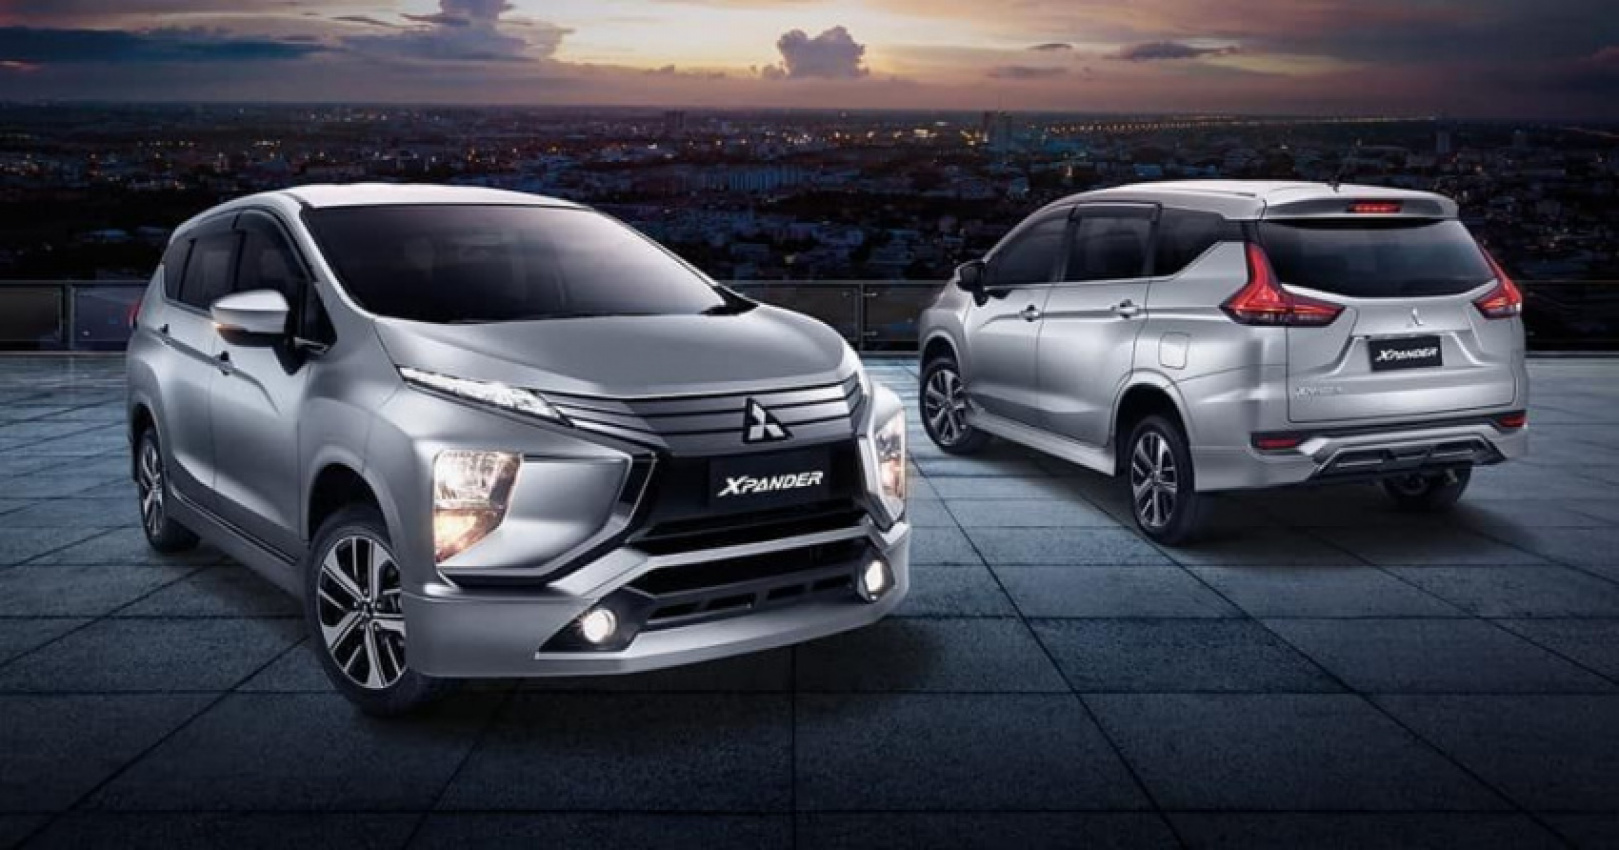 autos, cars, mitsubishi, reviews, insights, mitsubishi motors malaysia, mitsubishi xpander, mitsubishi xpander: geared up for the malaysian lifestyle